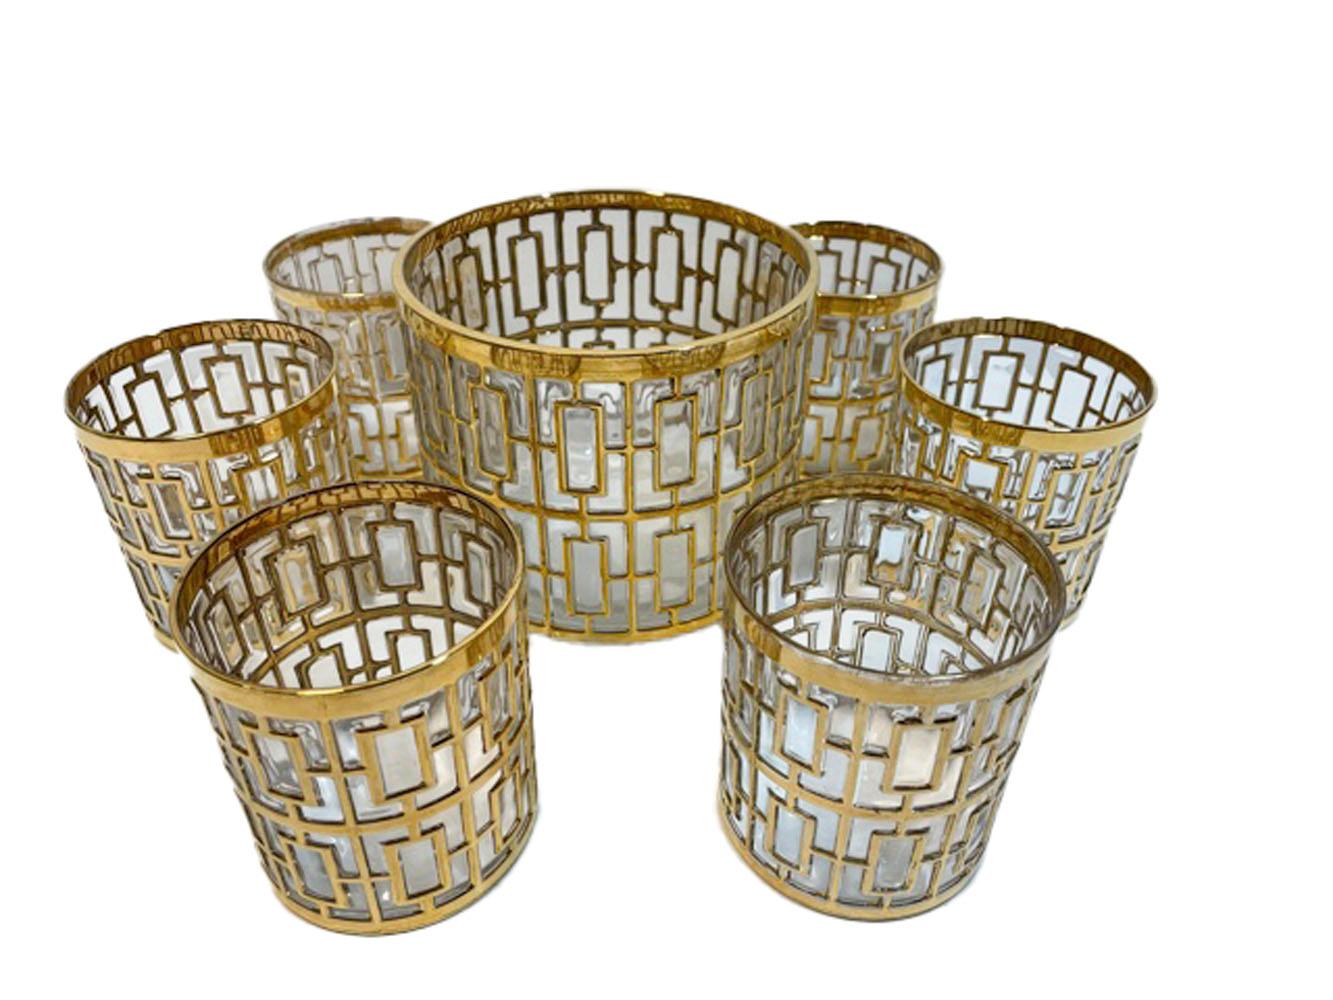 American Vintage Imperial Glass Co., Shoji Pattern Ice Bowl and 6 Rocks Glasses